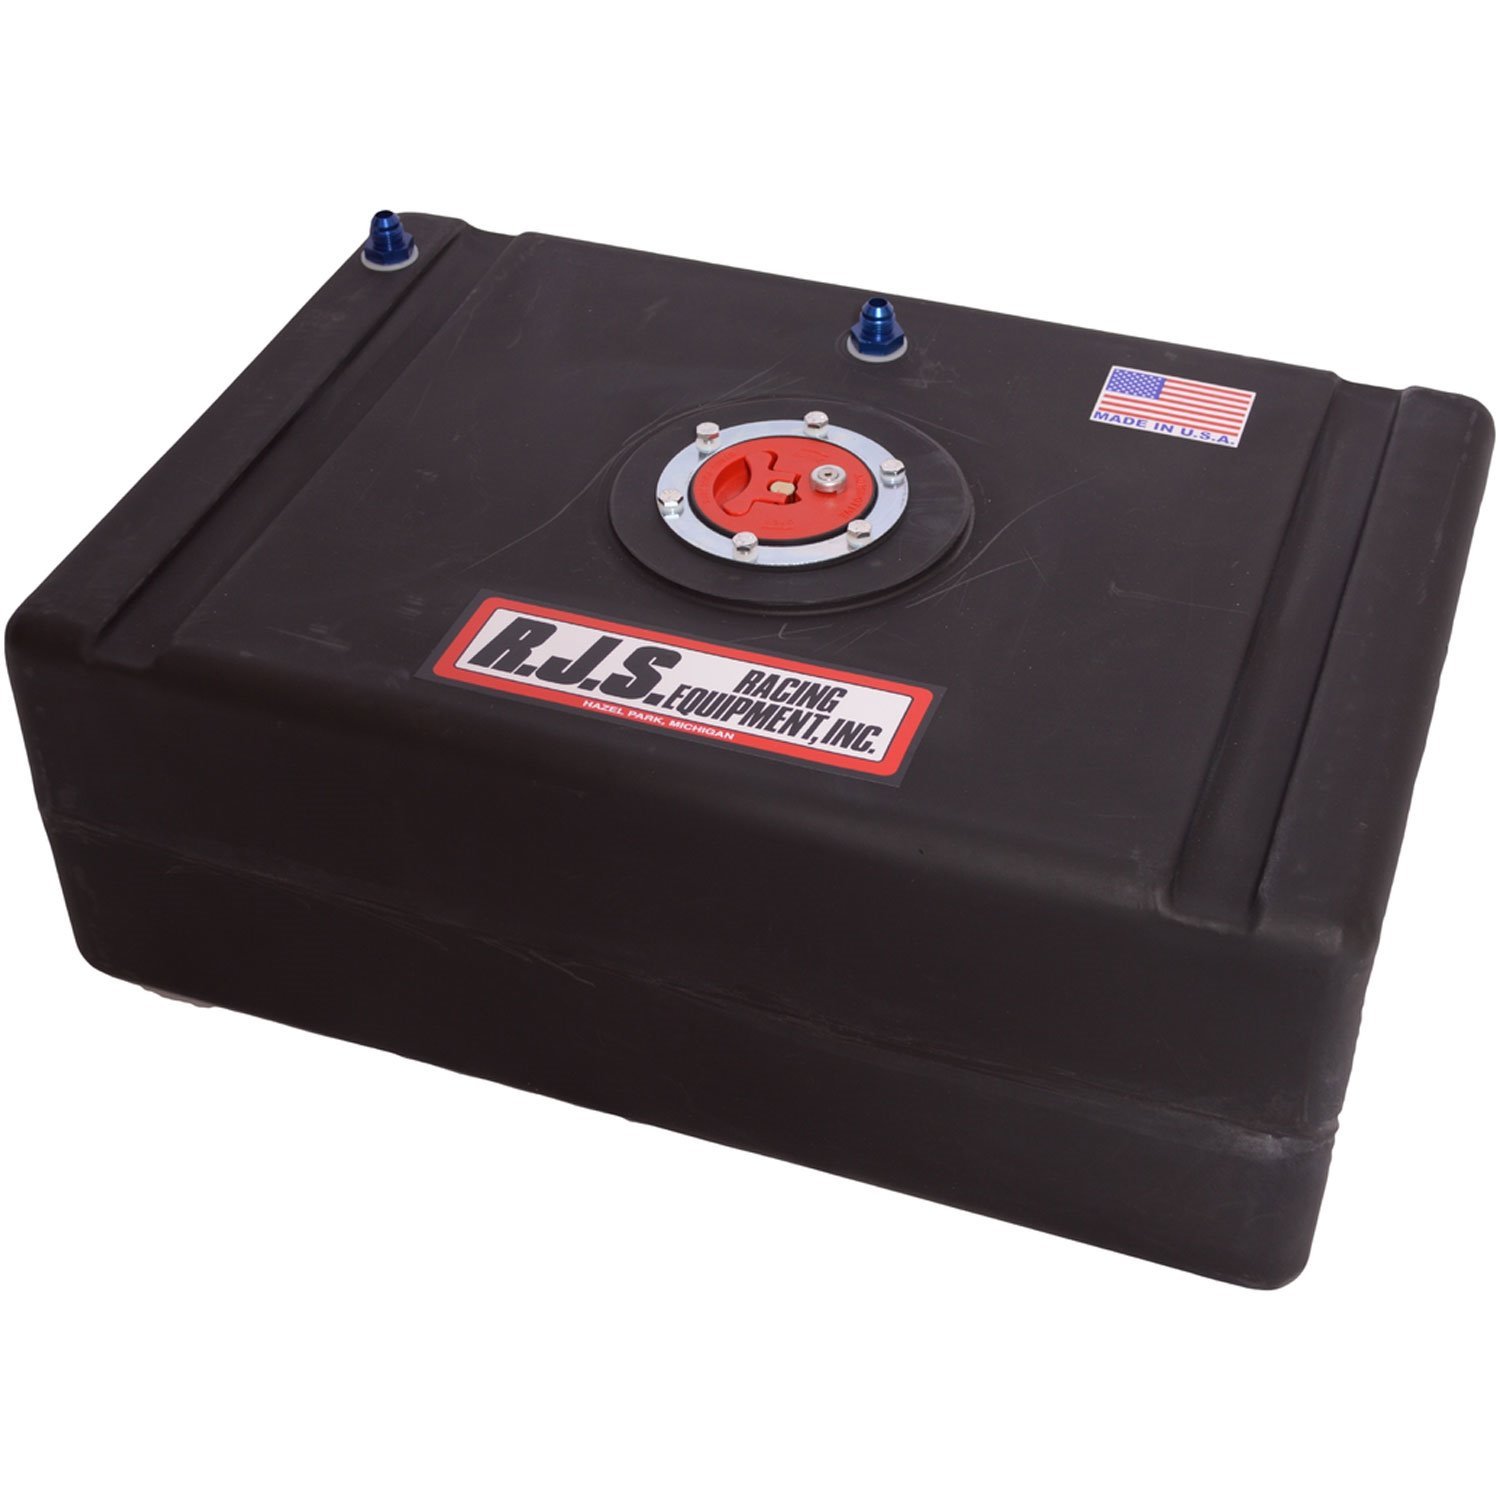 15 Gallon Economy Fuel Cell with Aircraft Style Filler Cap and Red Can